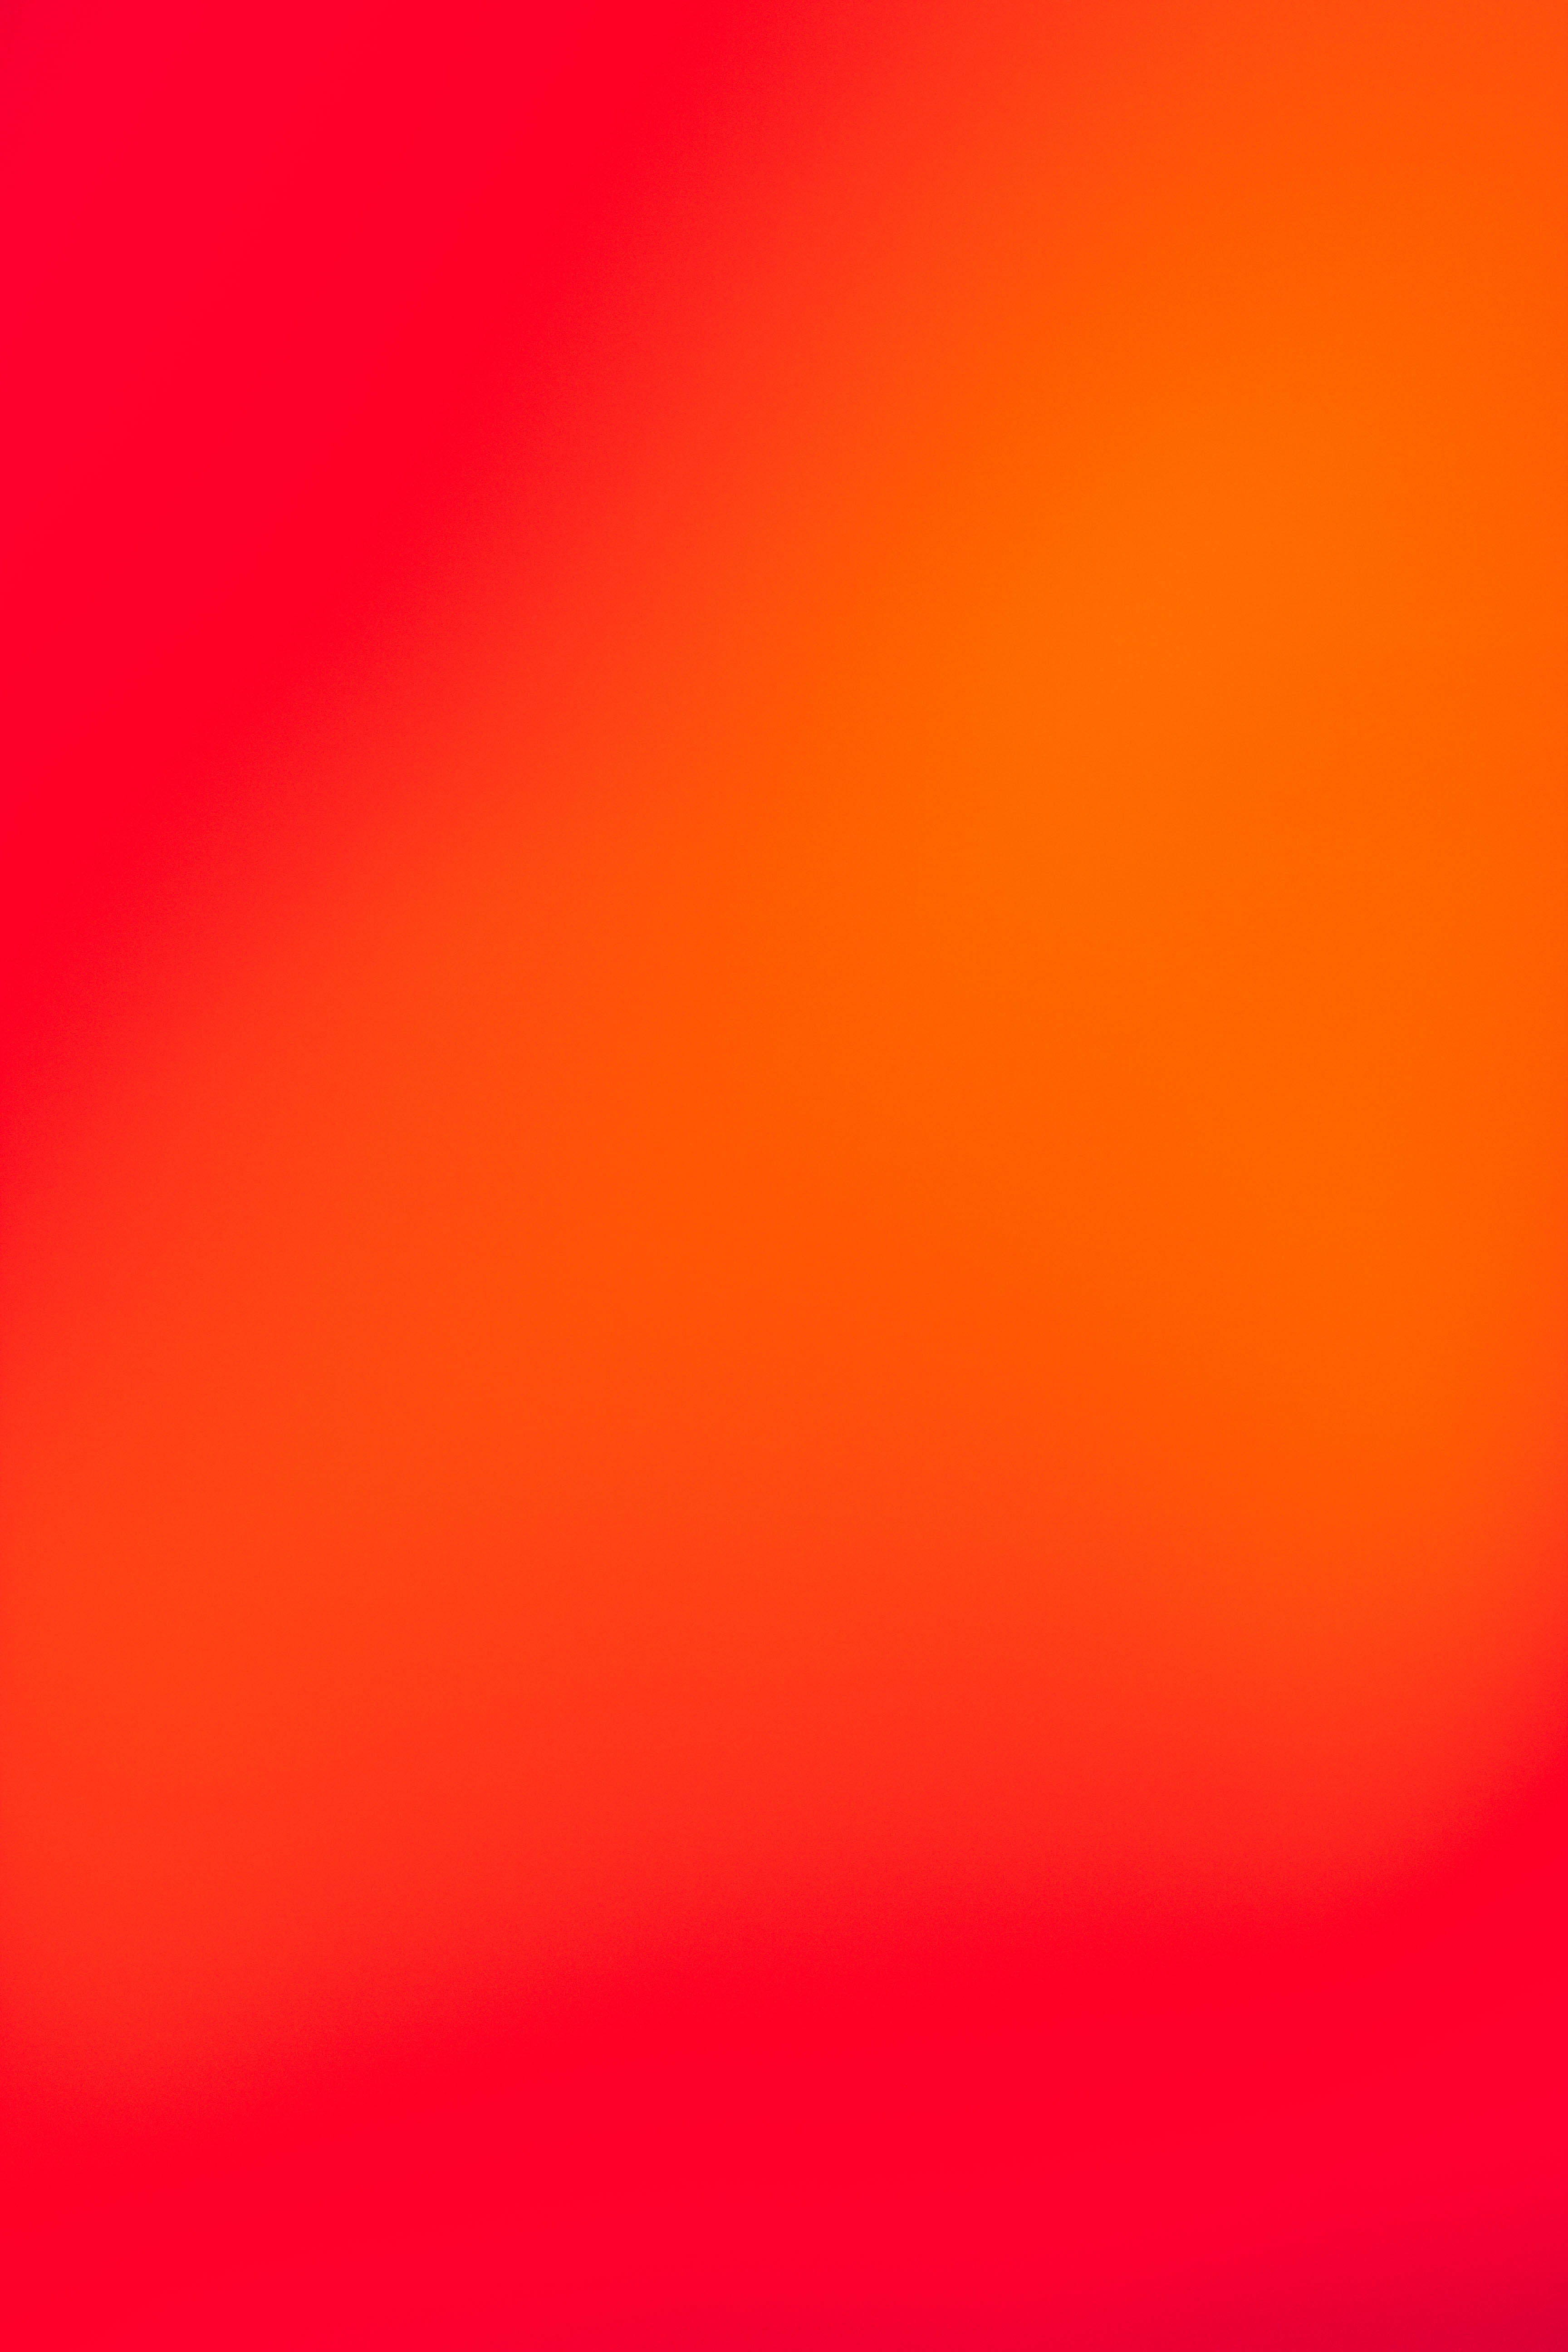 gradient, orange, color, abstract, red, bright